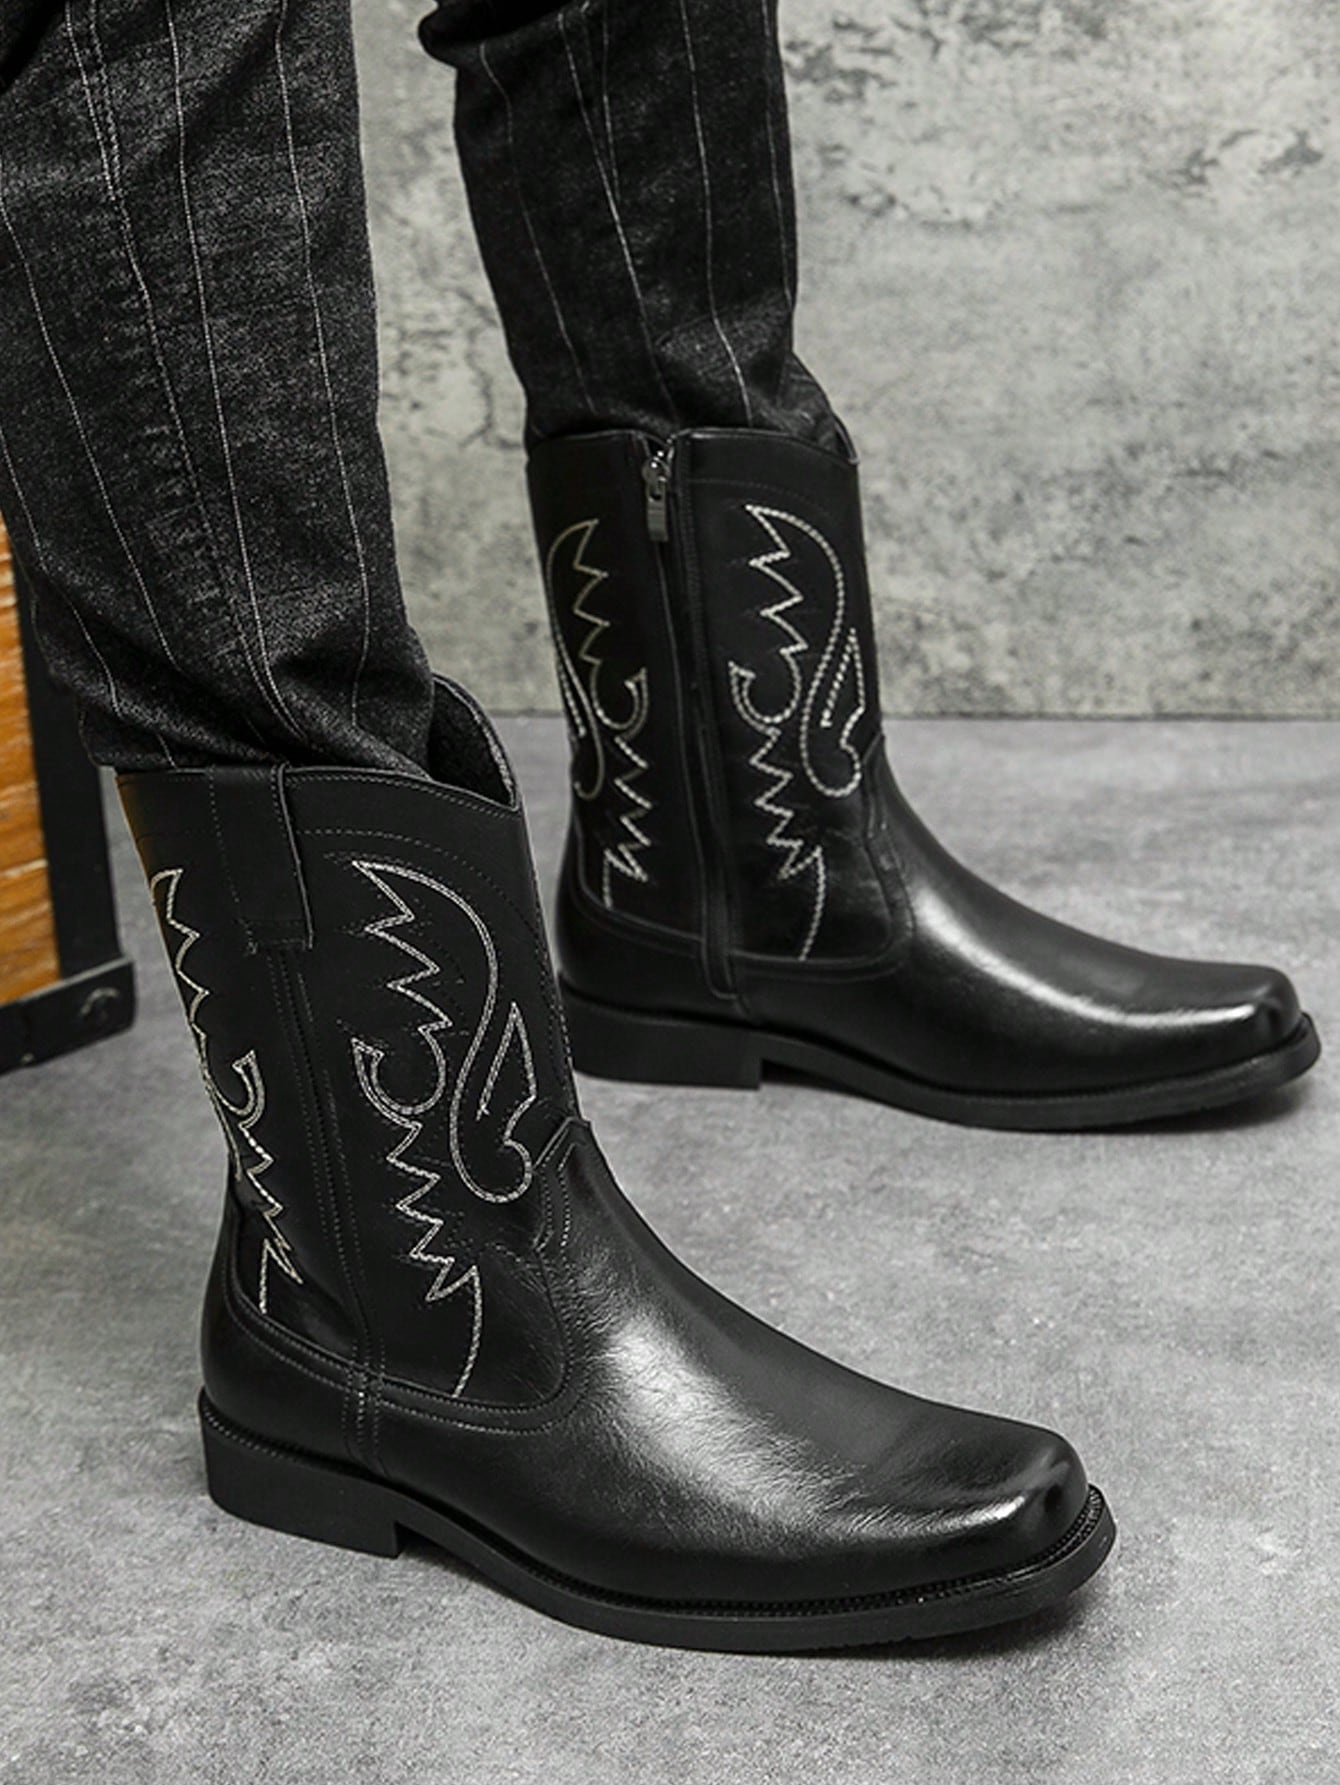 Men's Conquer The Wild Western Style Embroidered High Top Leather Cowboy Boots 💜